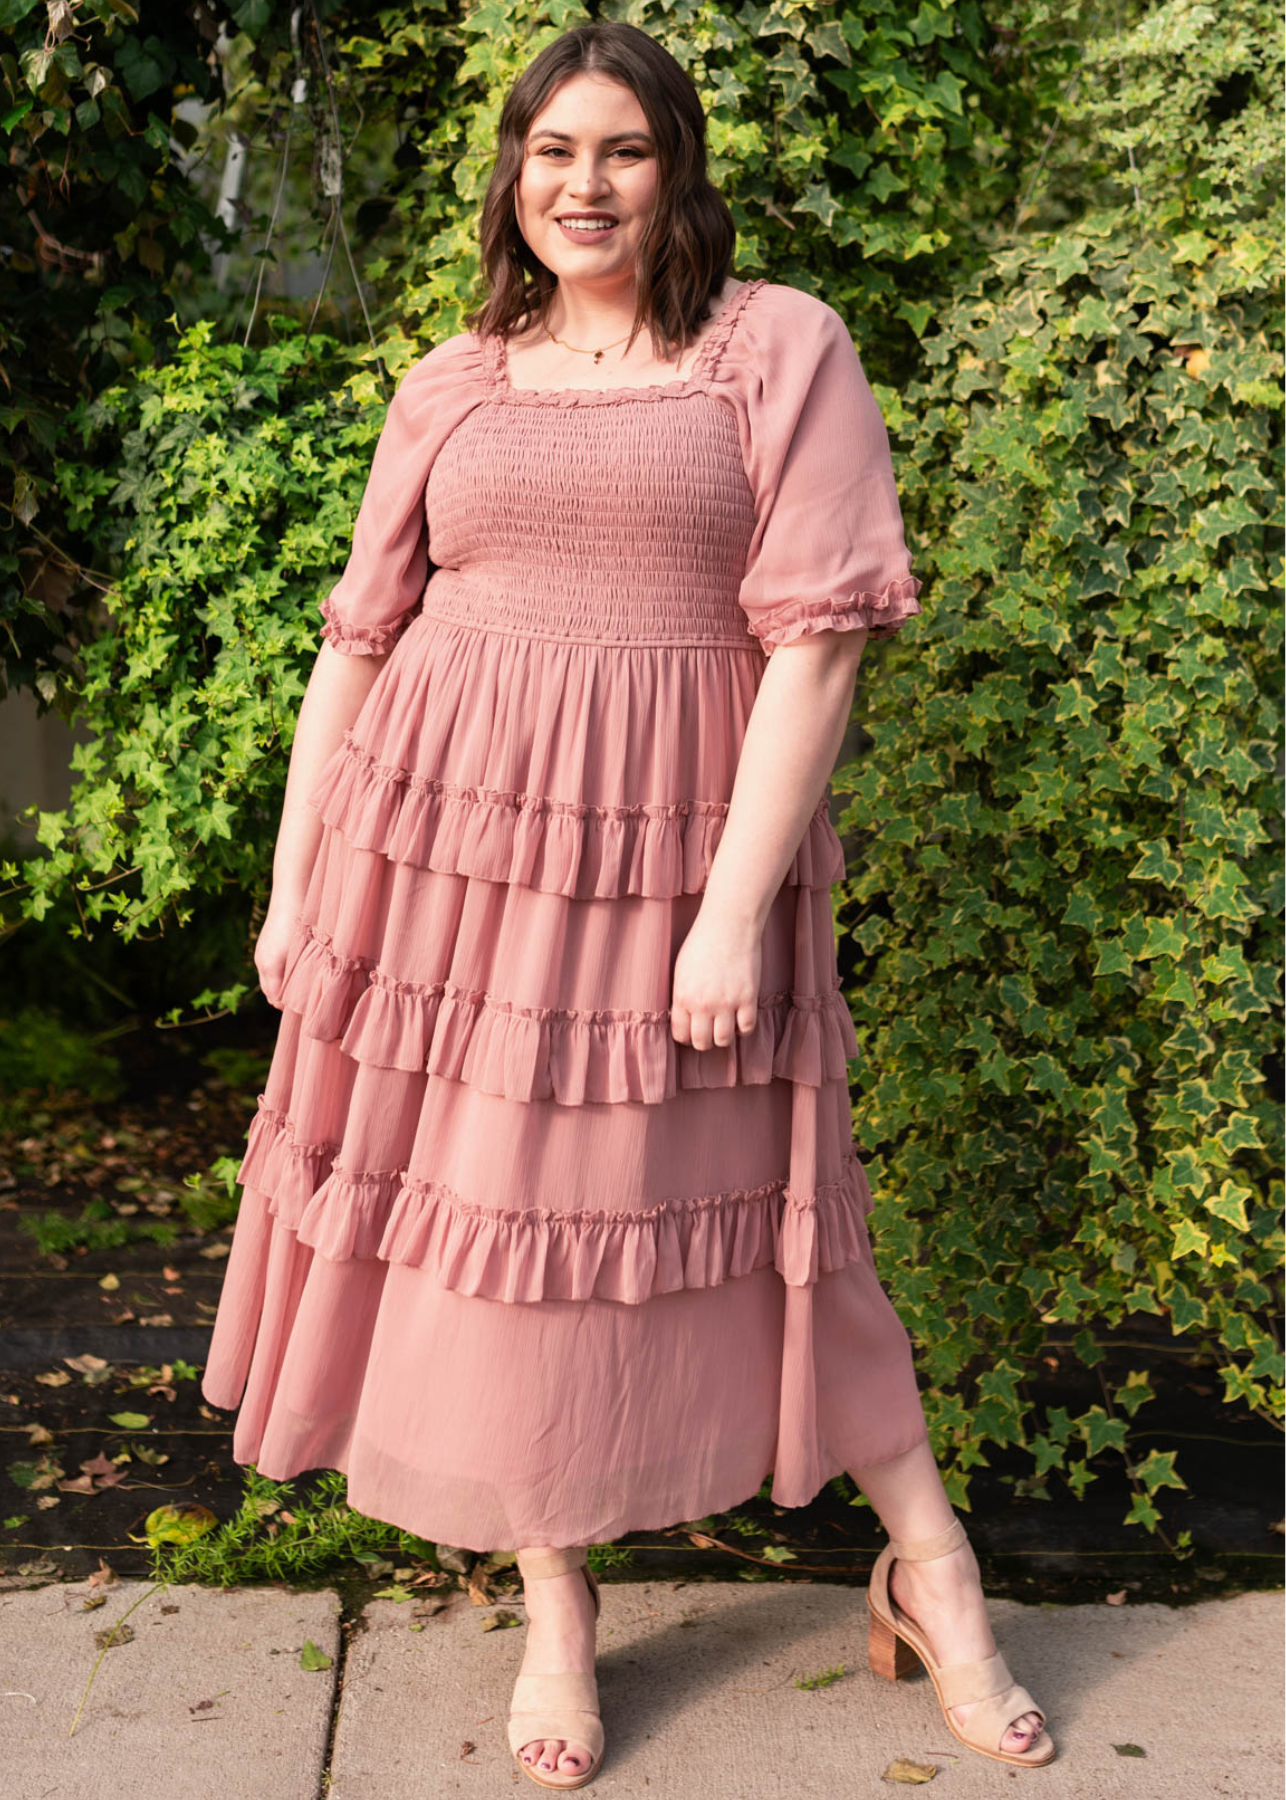 Short sleeve plus size dusty pink tiered dress